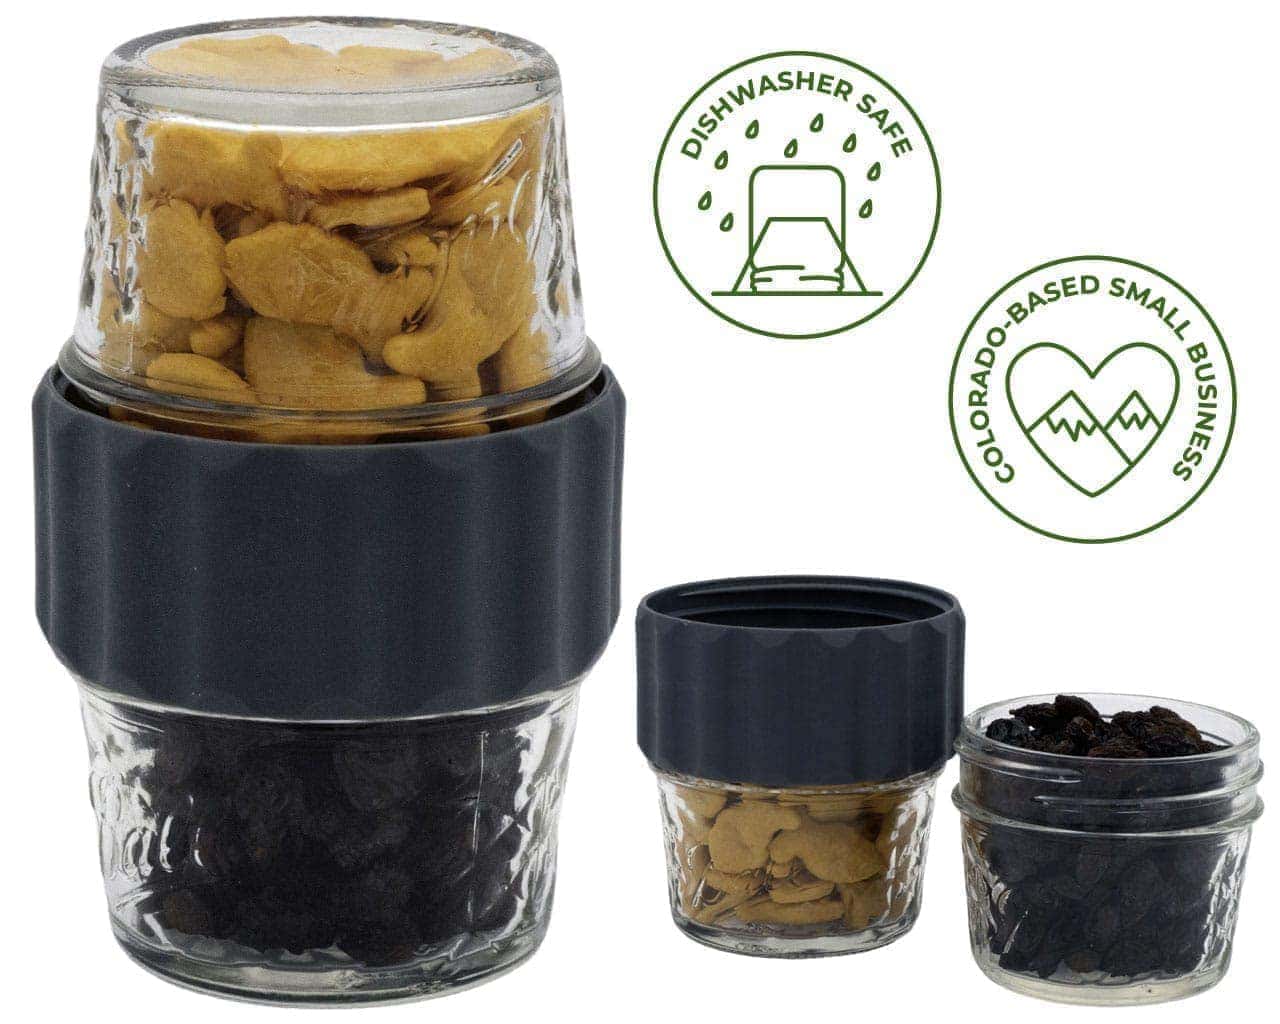 2-in-1-lid-connect-two-regular-mouth-mason-jars-charcoal-gray-silicone-seals-goldfish-crackers-raisins-snack-icons